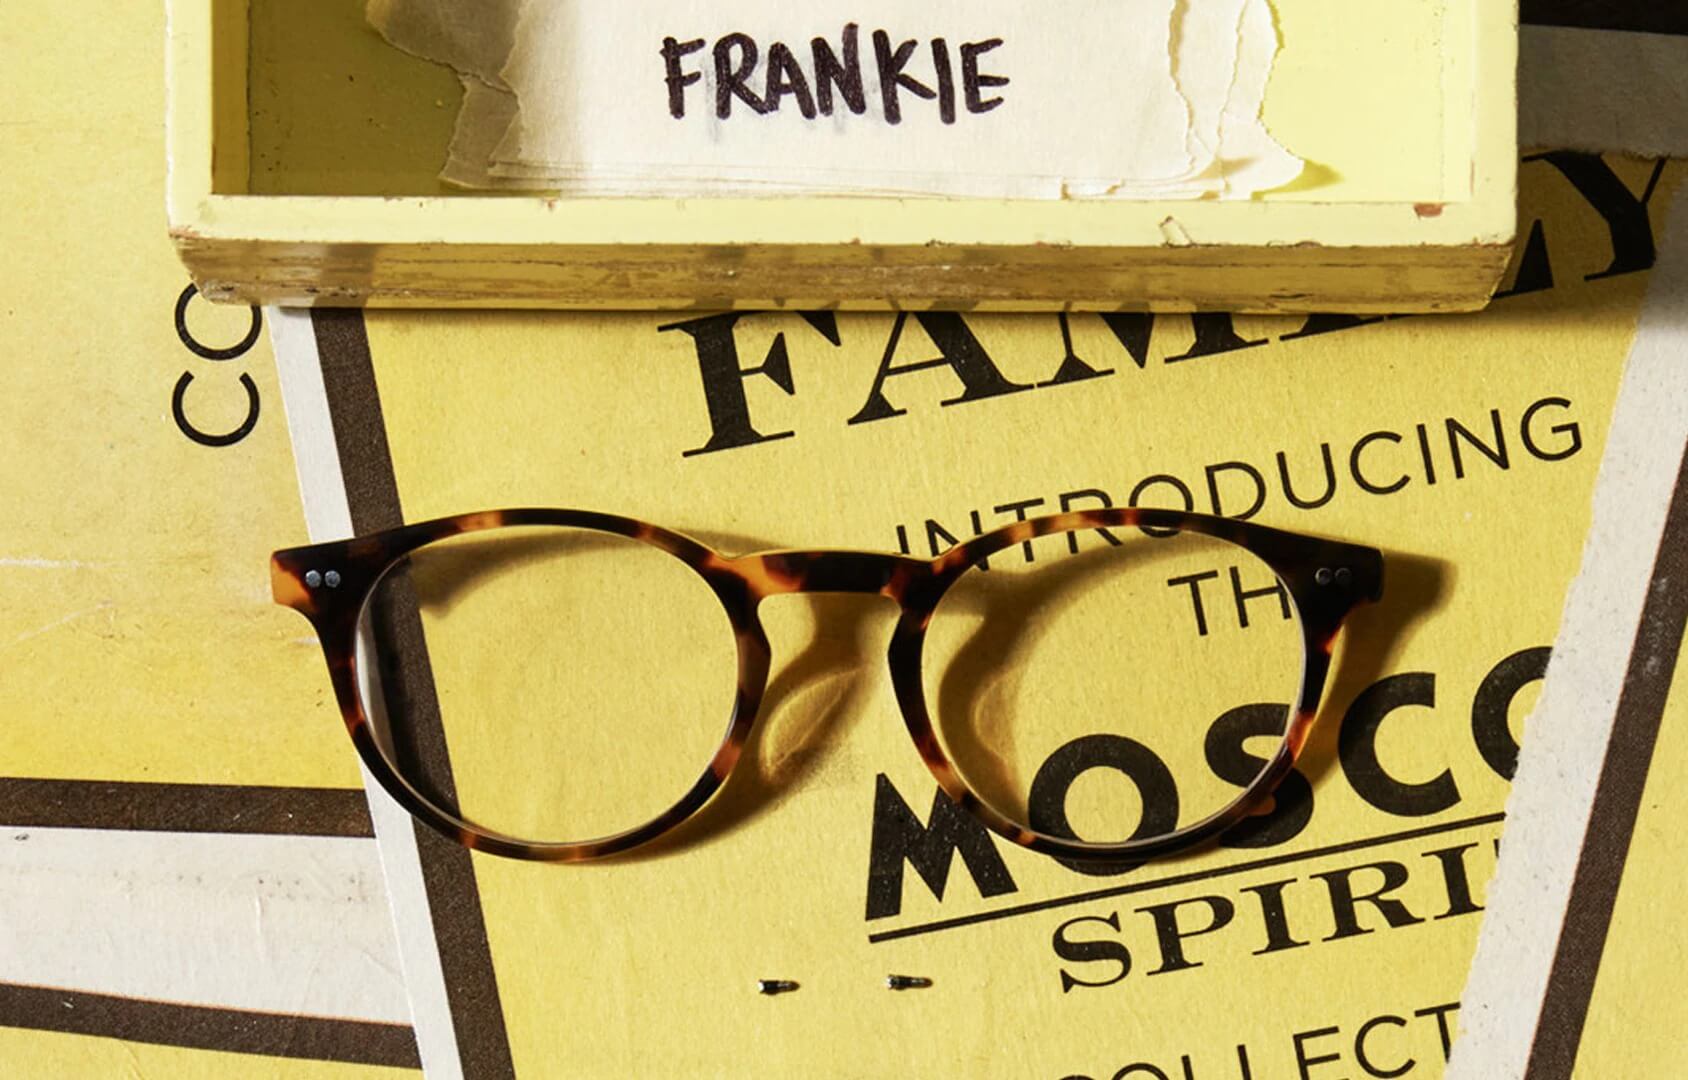 The FRANKIE inspired by Fran Lebowitz